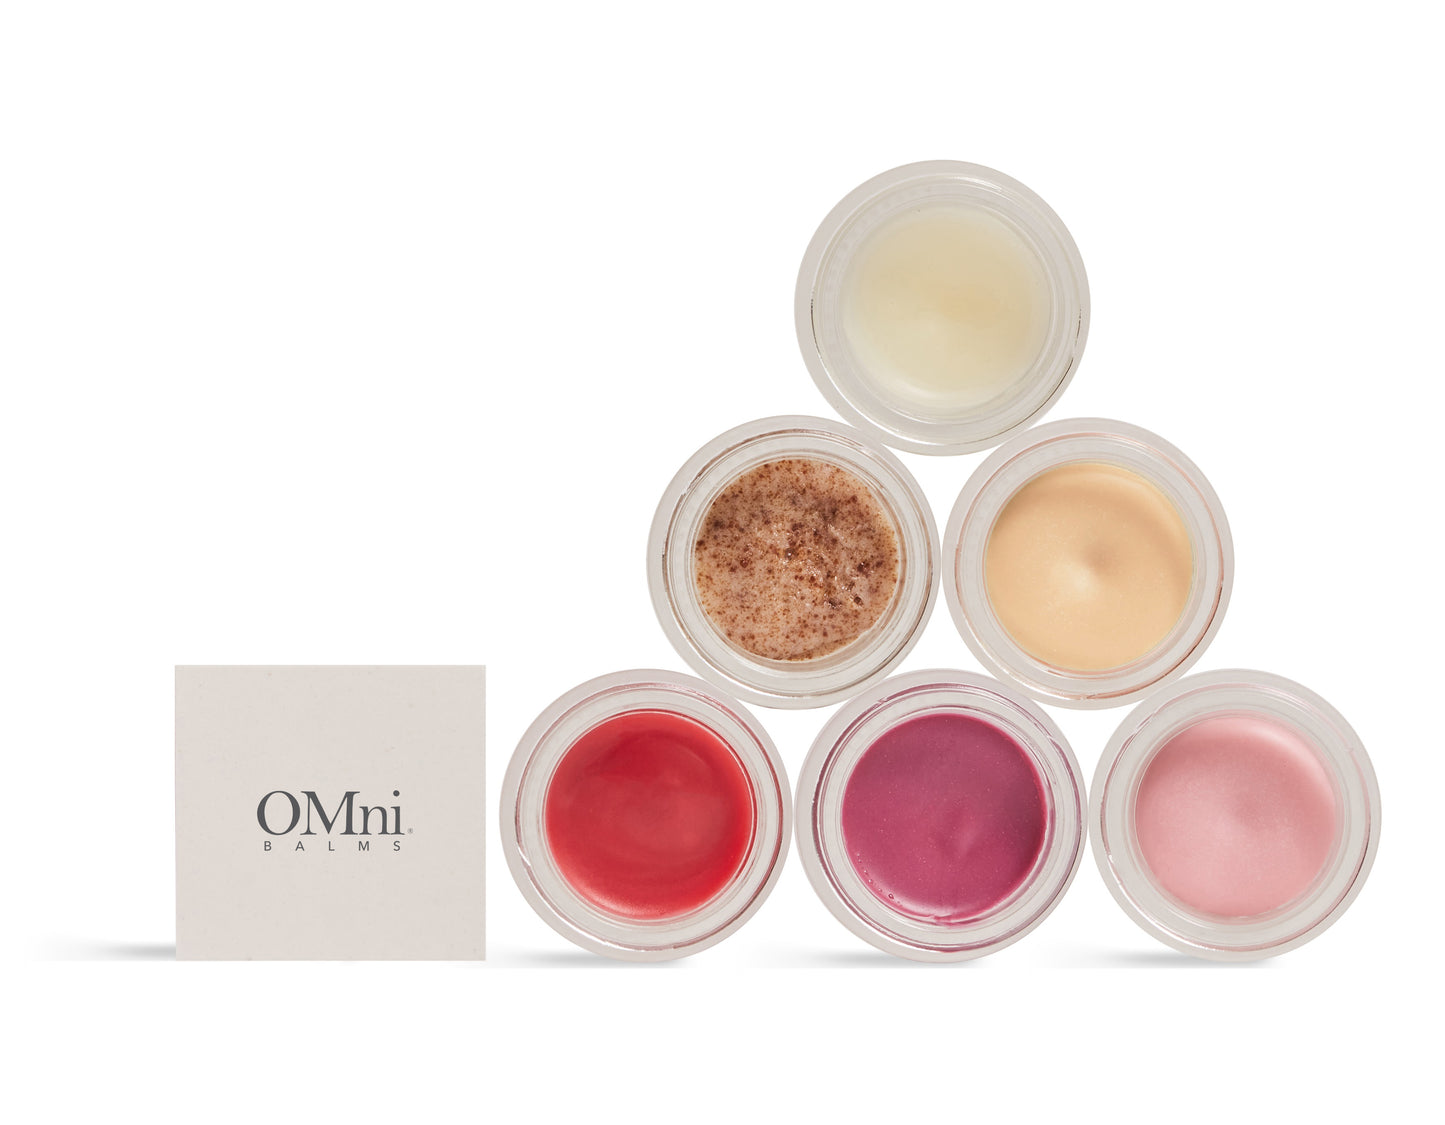 OMni Balms range of natural multi-use balms for dry skin and lips